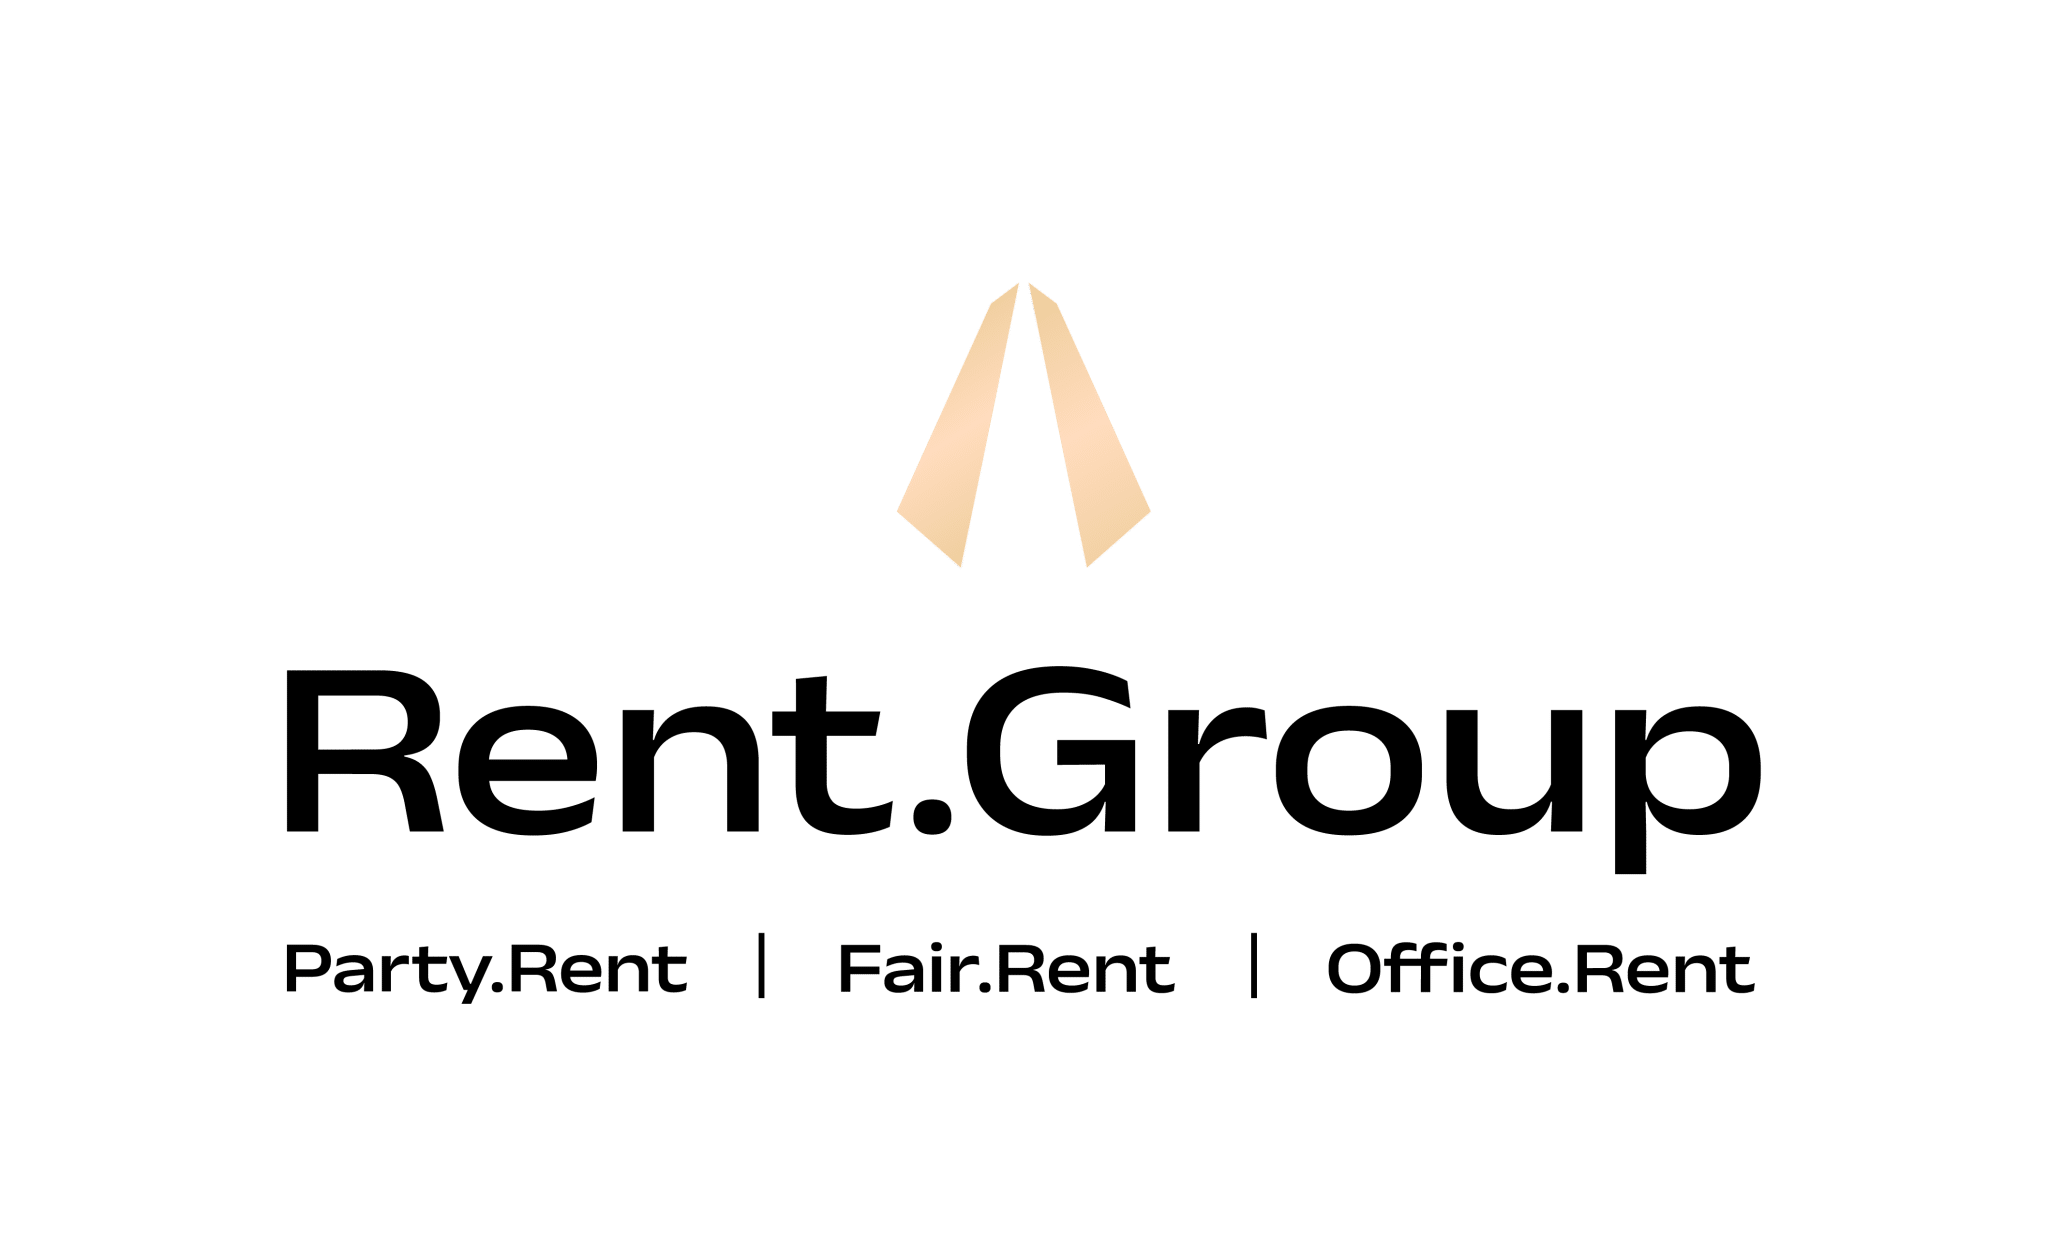 Rent Group - Partyrent